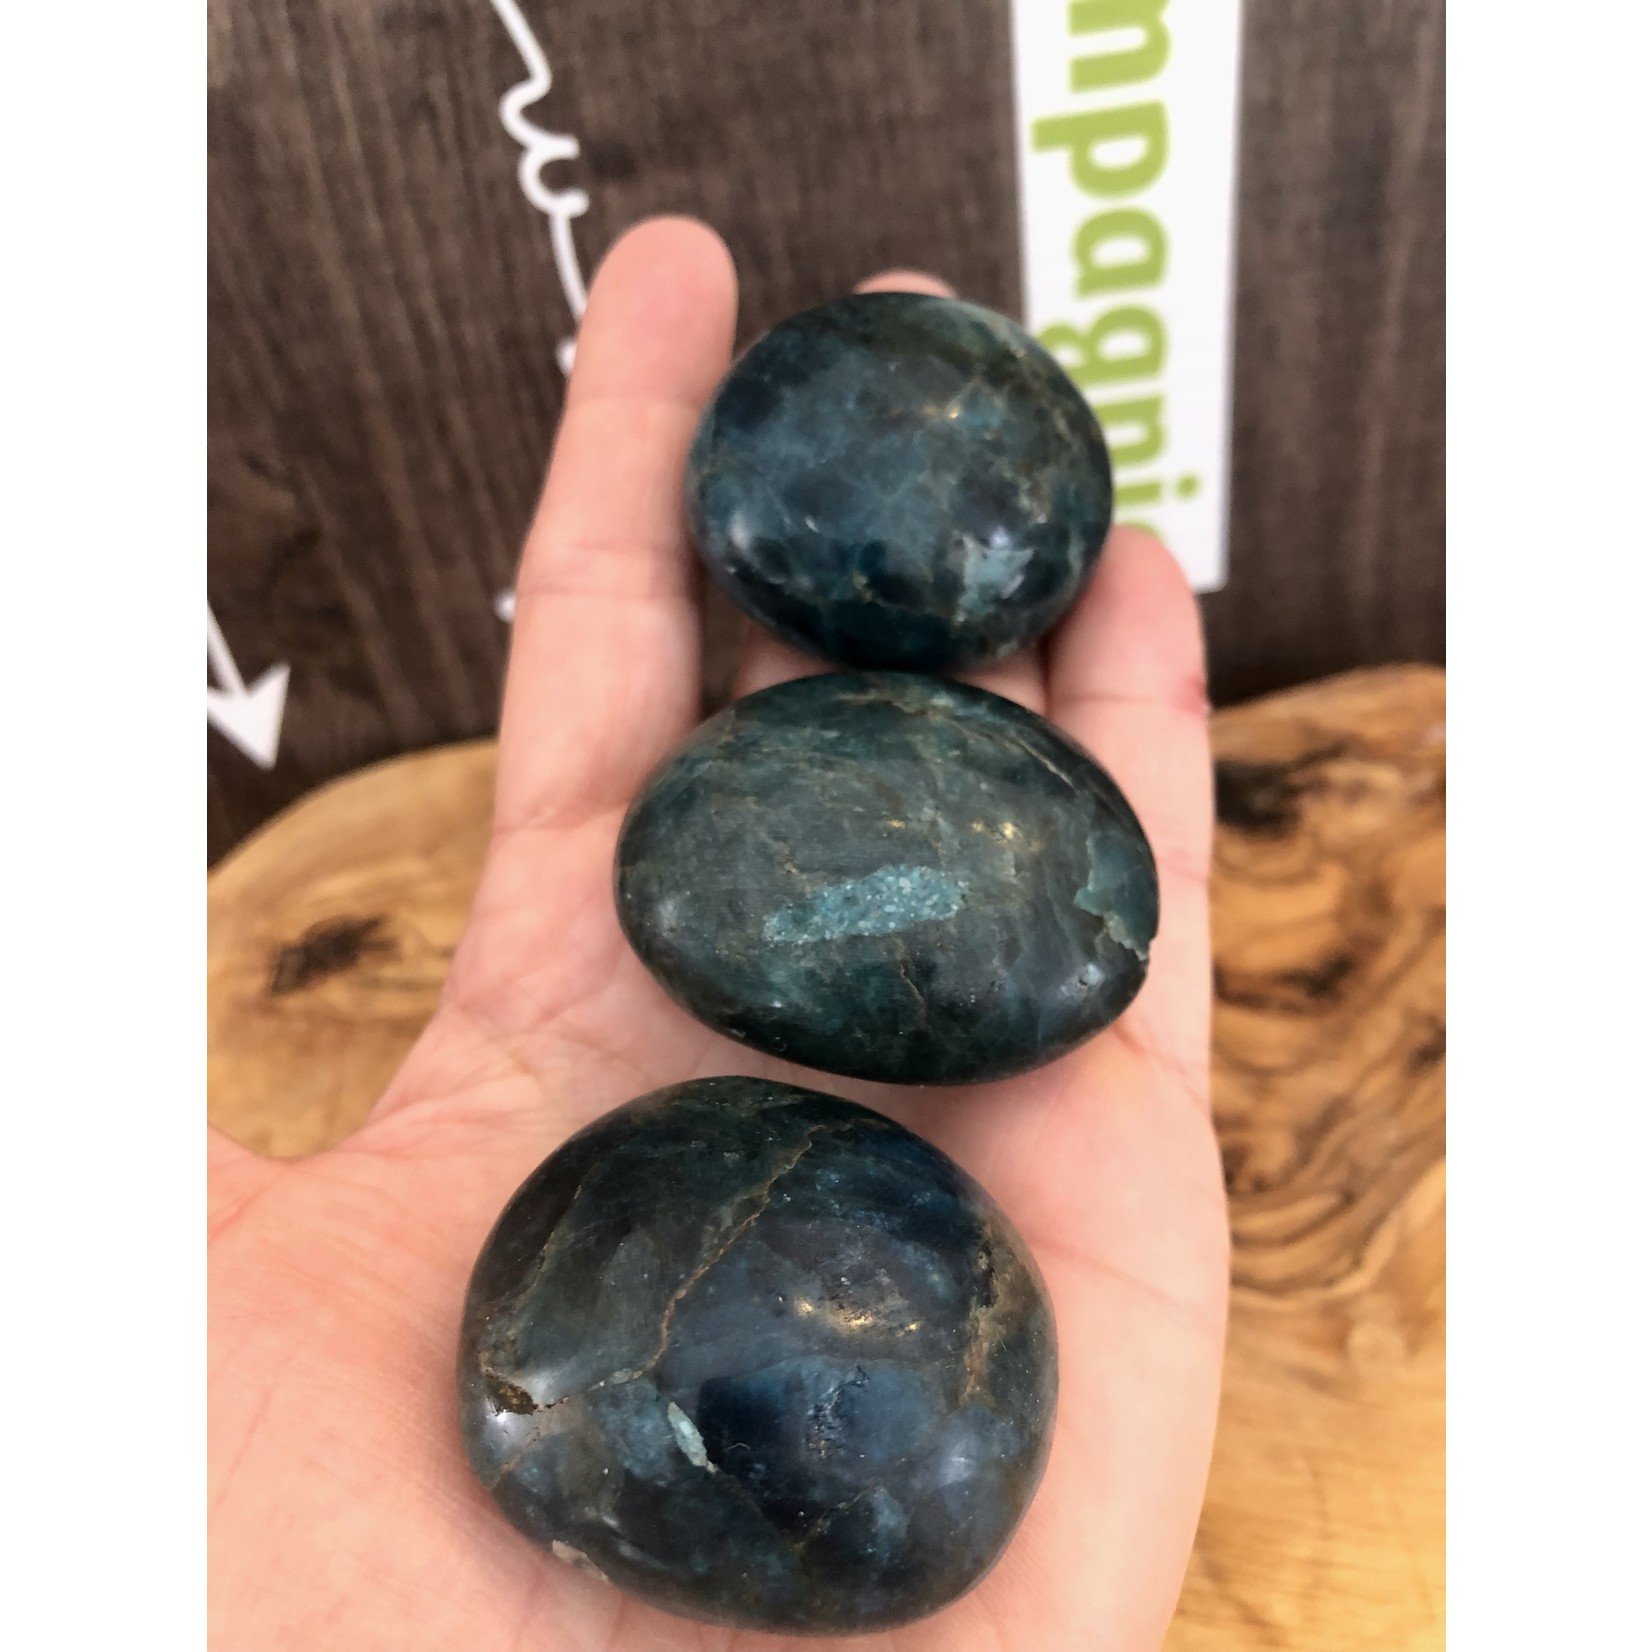 large apatite tumbled stone, choice of dark or light color, used to facilitate communication and self-expression